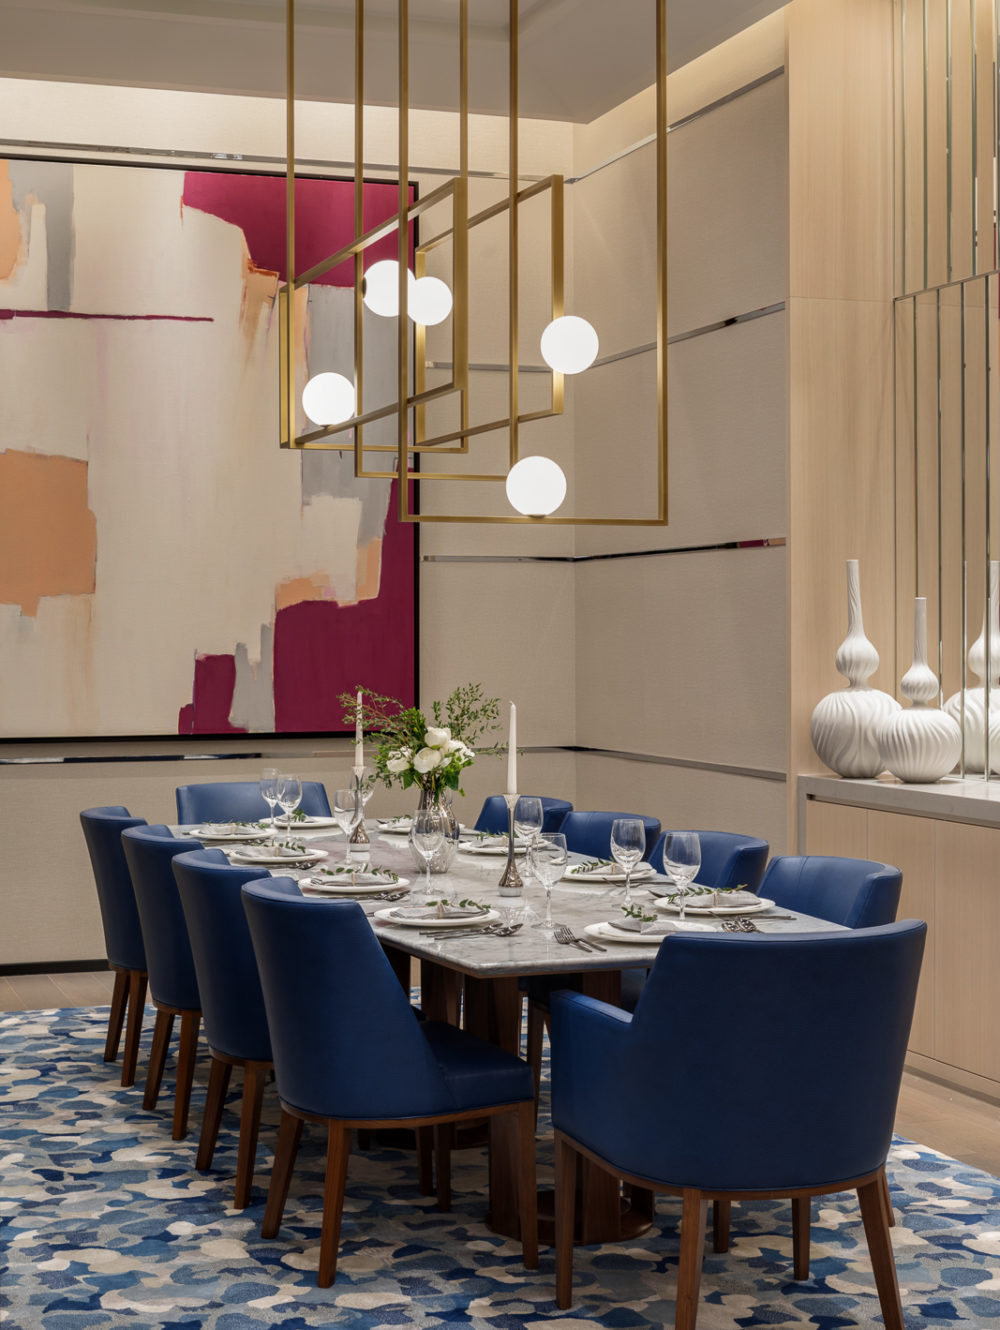 Interior view of 277 Fifth Avenue residence private dining room in NYC. Includes table with blue chairs and lighting fixture.